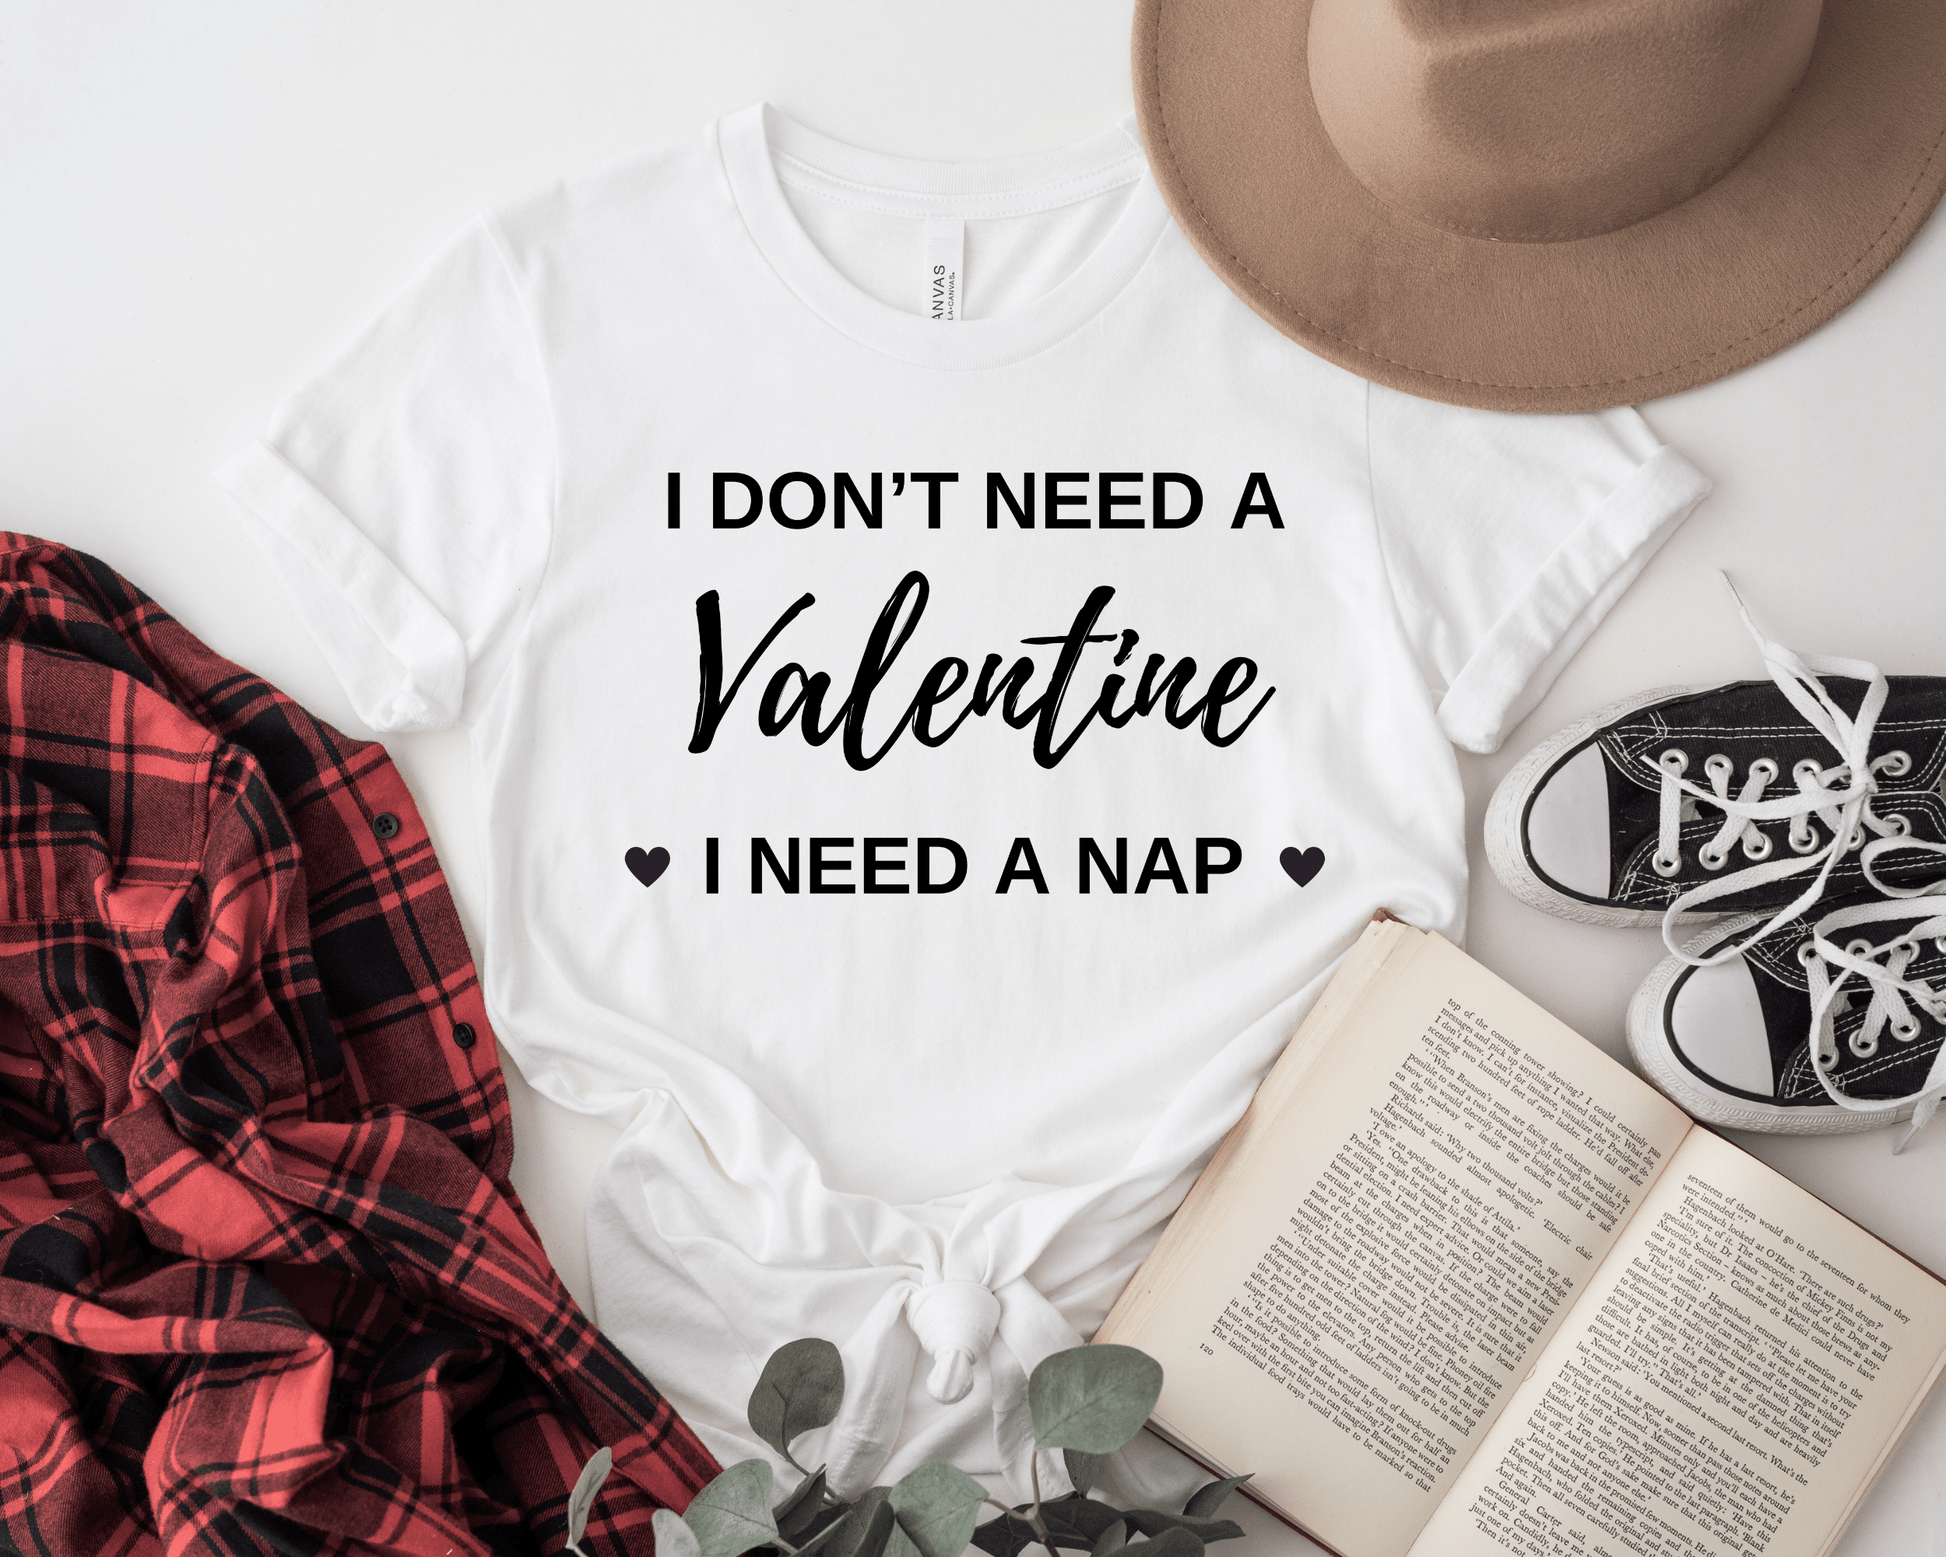 I Don't need Valentine in need a Nap Unisex Premium Shirt Looper Tees